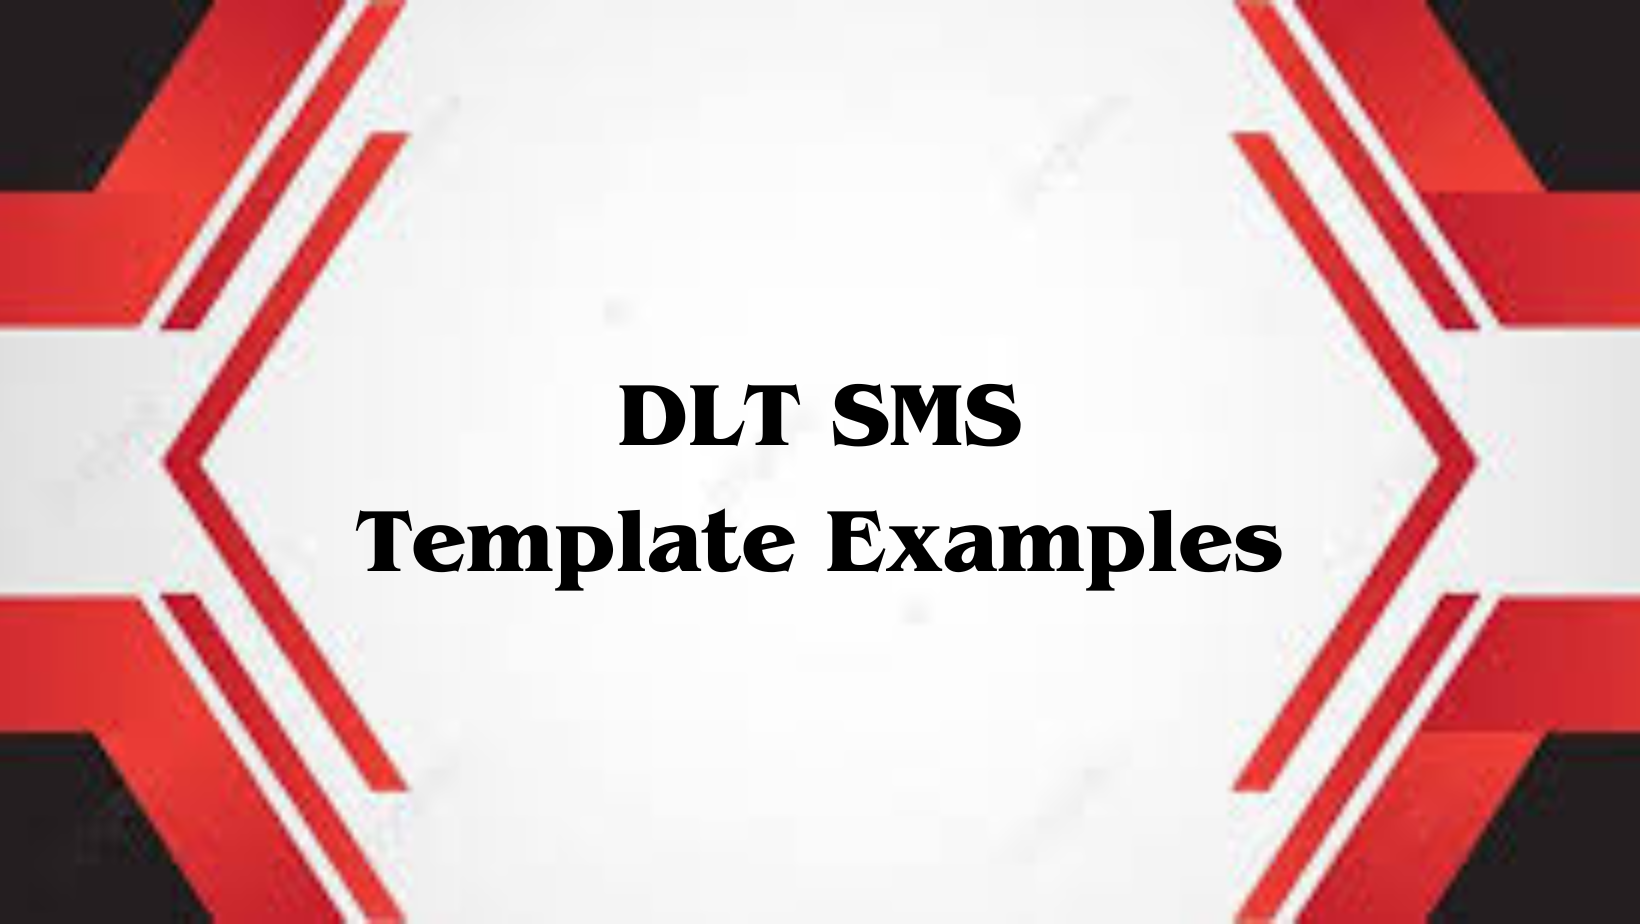 DLT SMS Template Examples